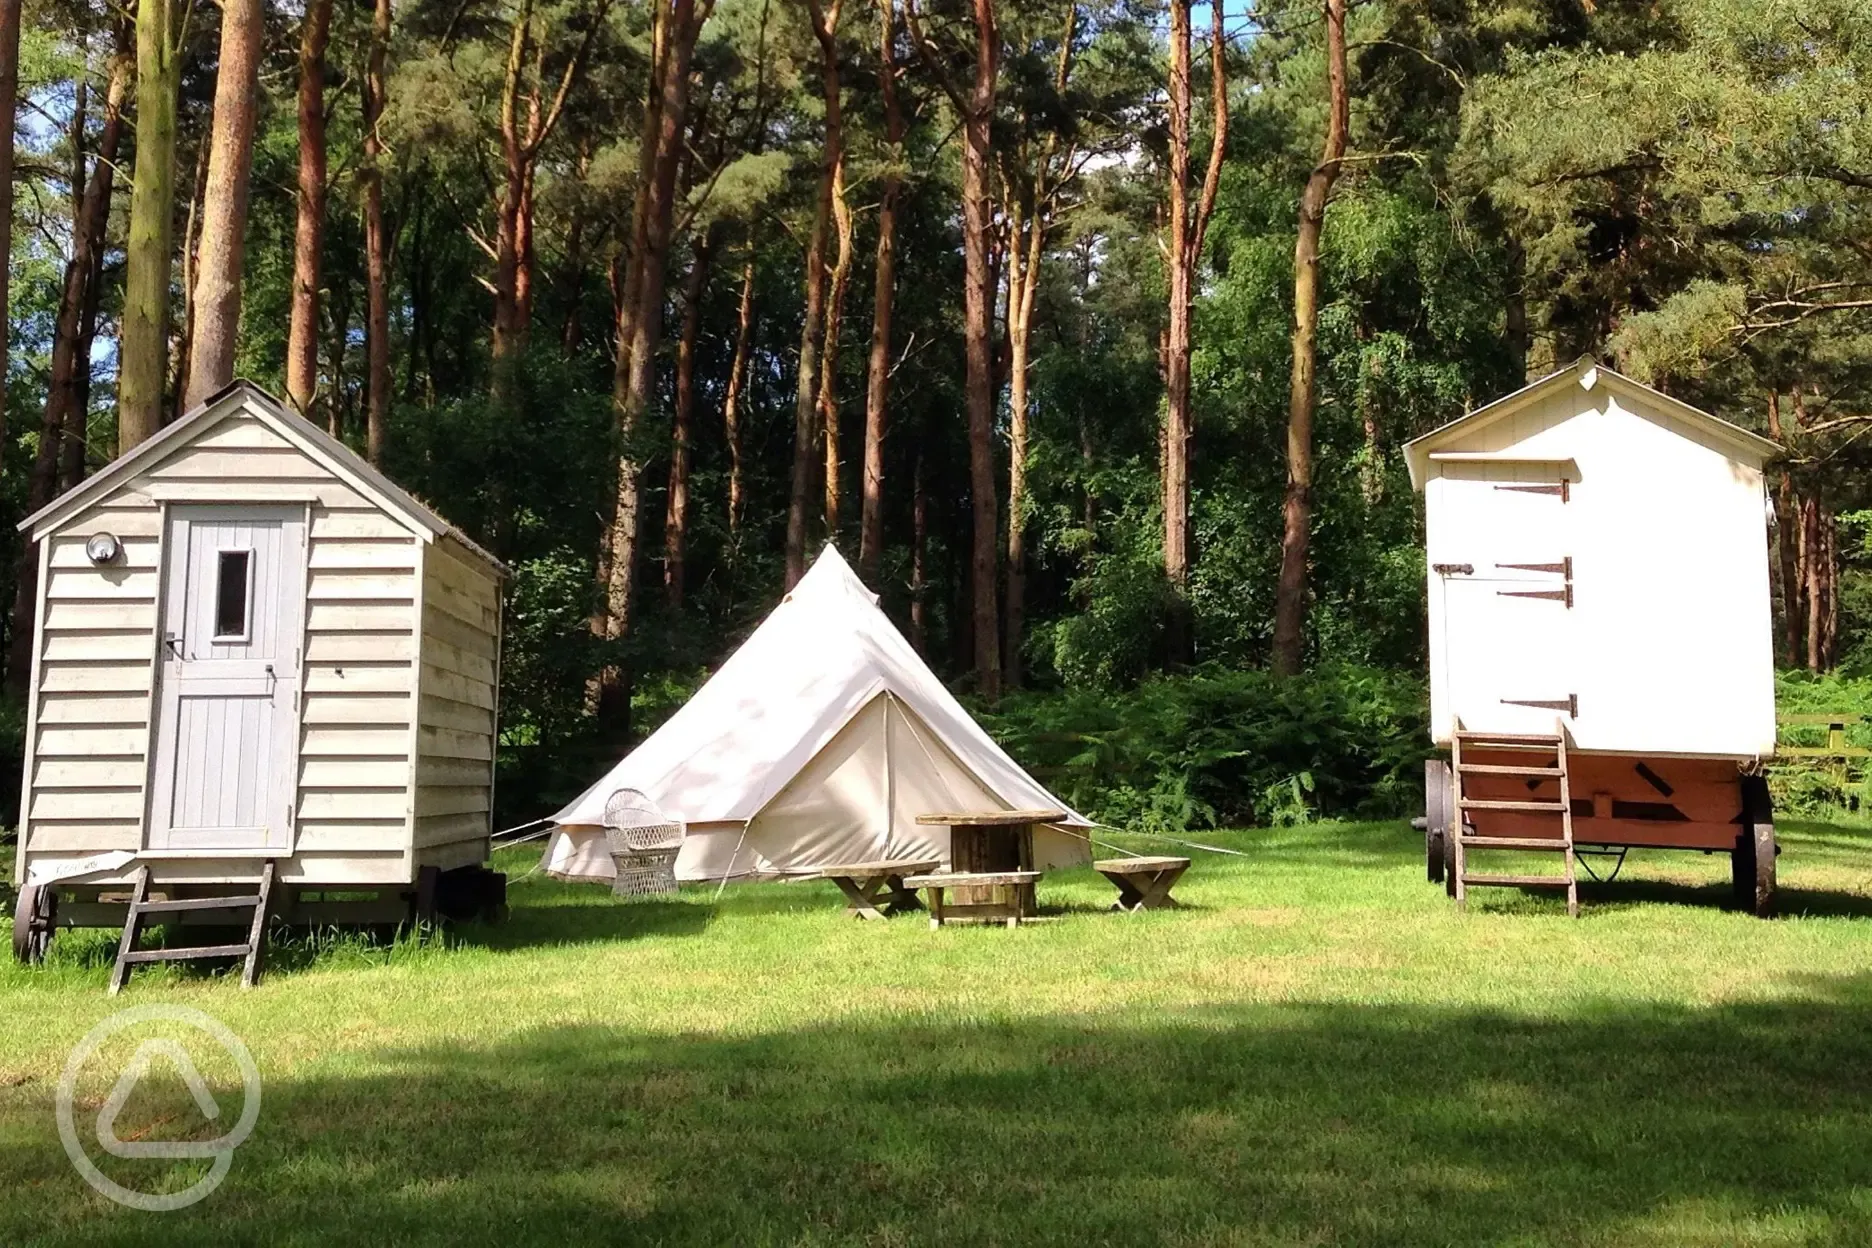 Shepherd's huts and bell tent